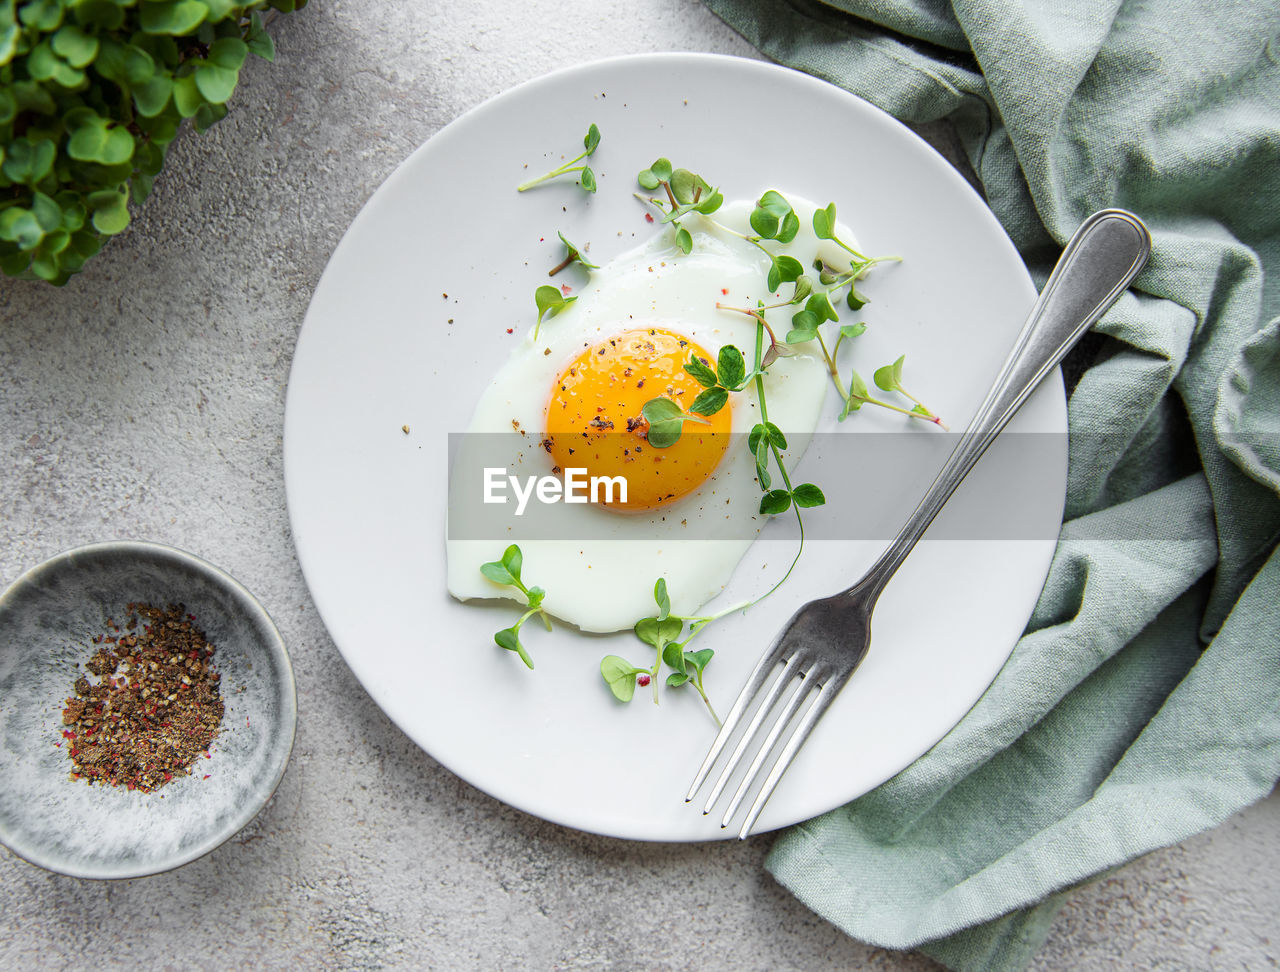 Fried eggs, microgreens and spices on a white plate on concrete background